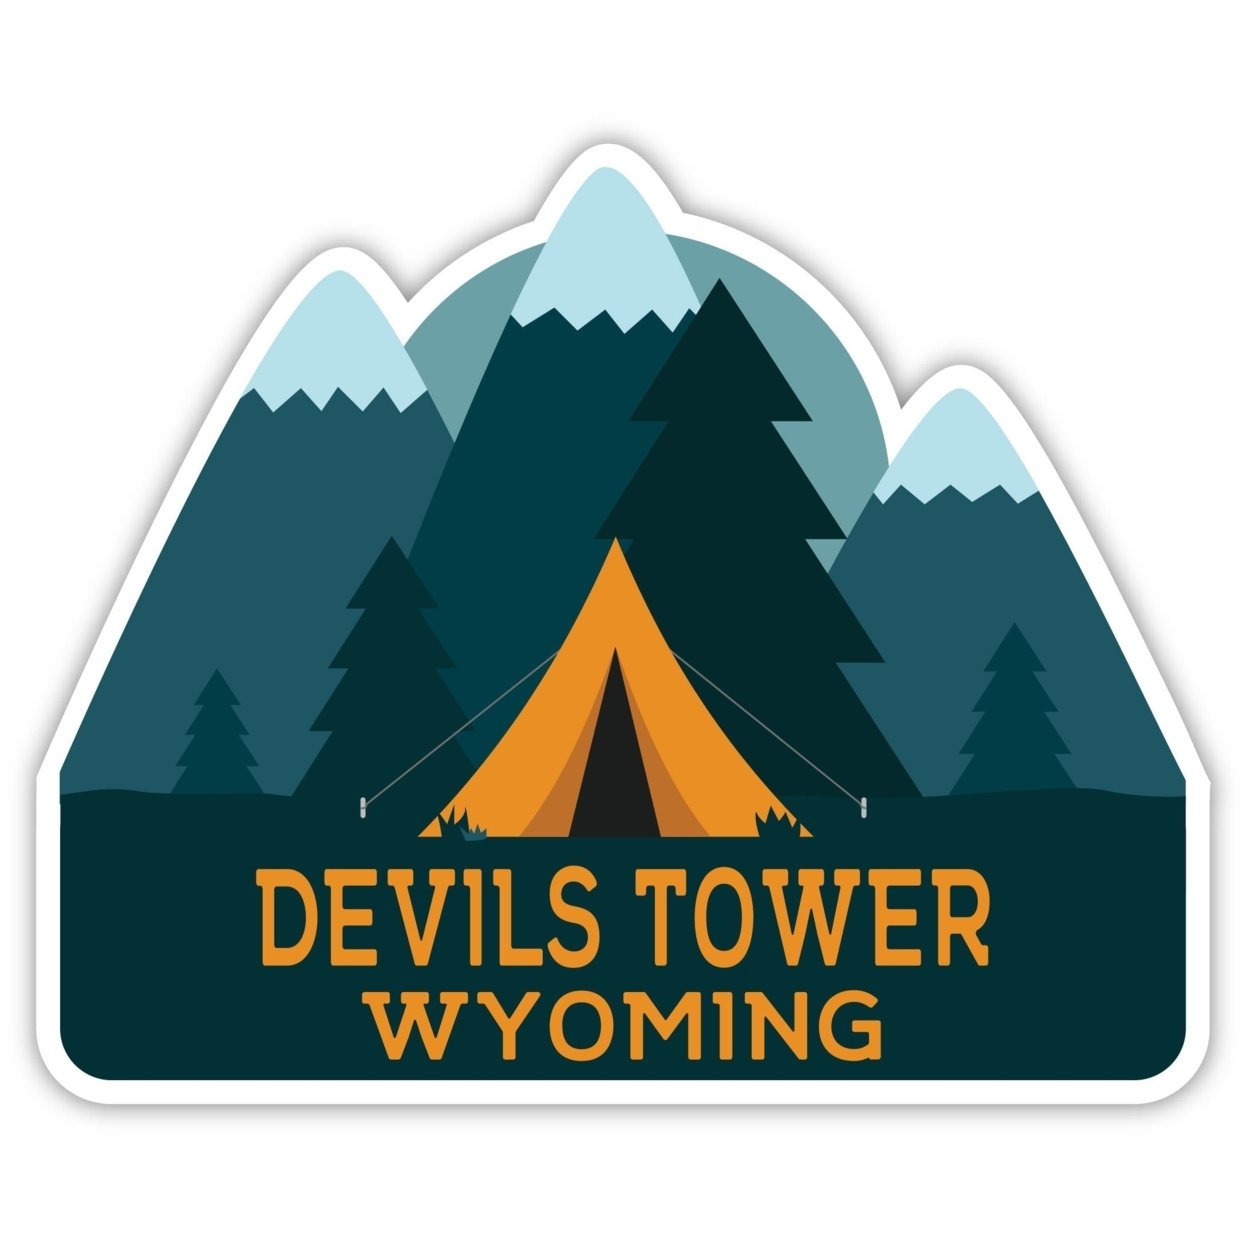 Devils Tower Wyoming Souvenir Decorative Stickers (Choose Theme And Size) - Single Unit, 8-Inch, Tent